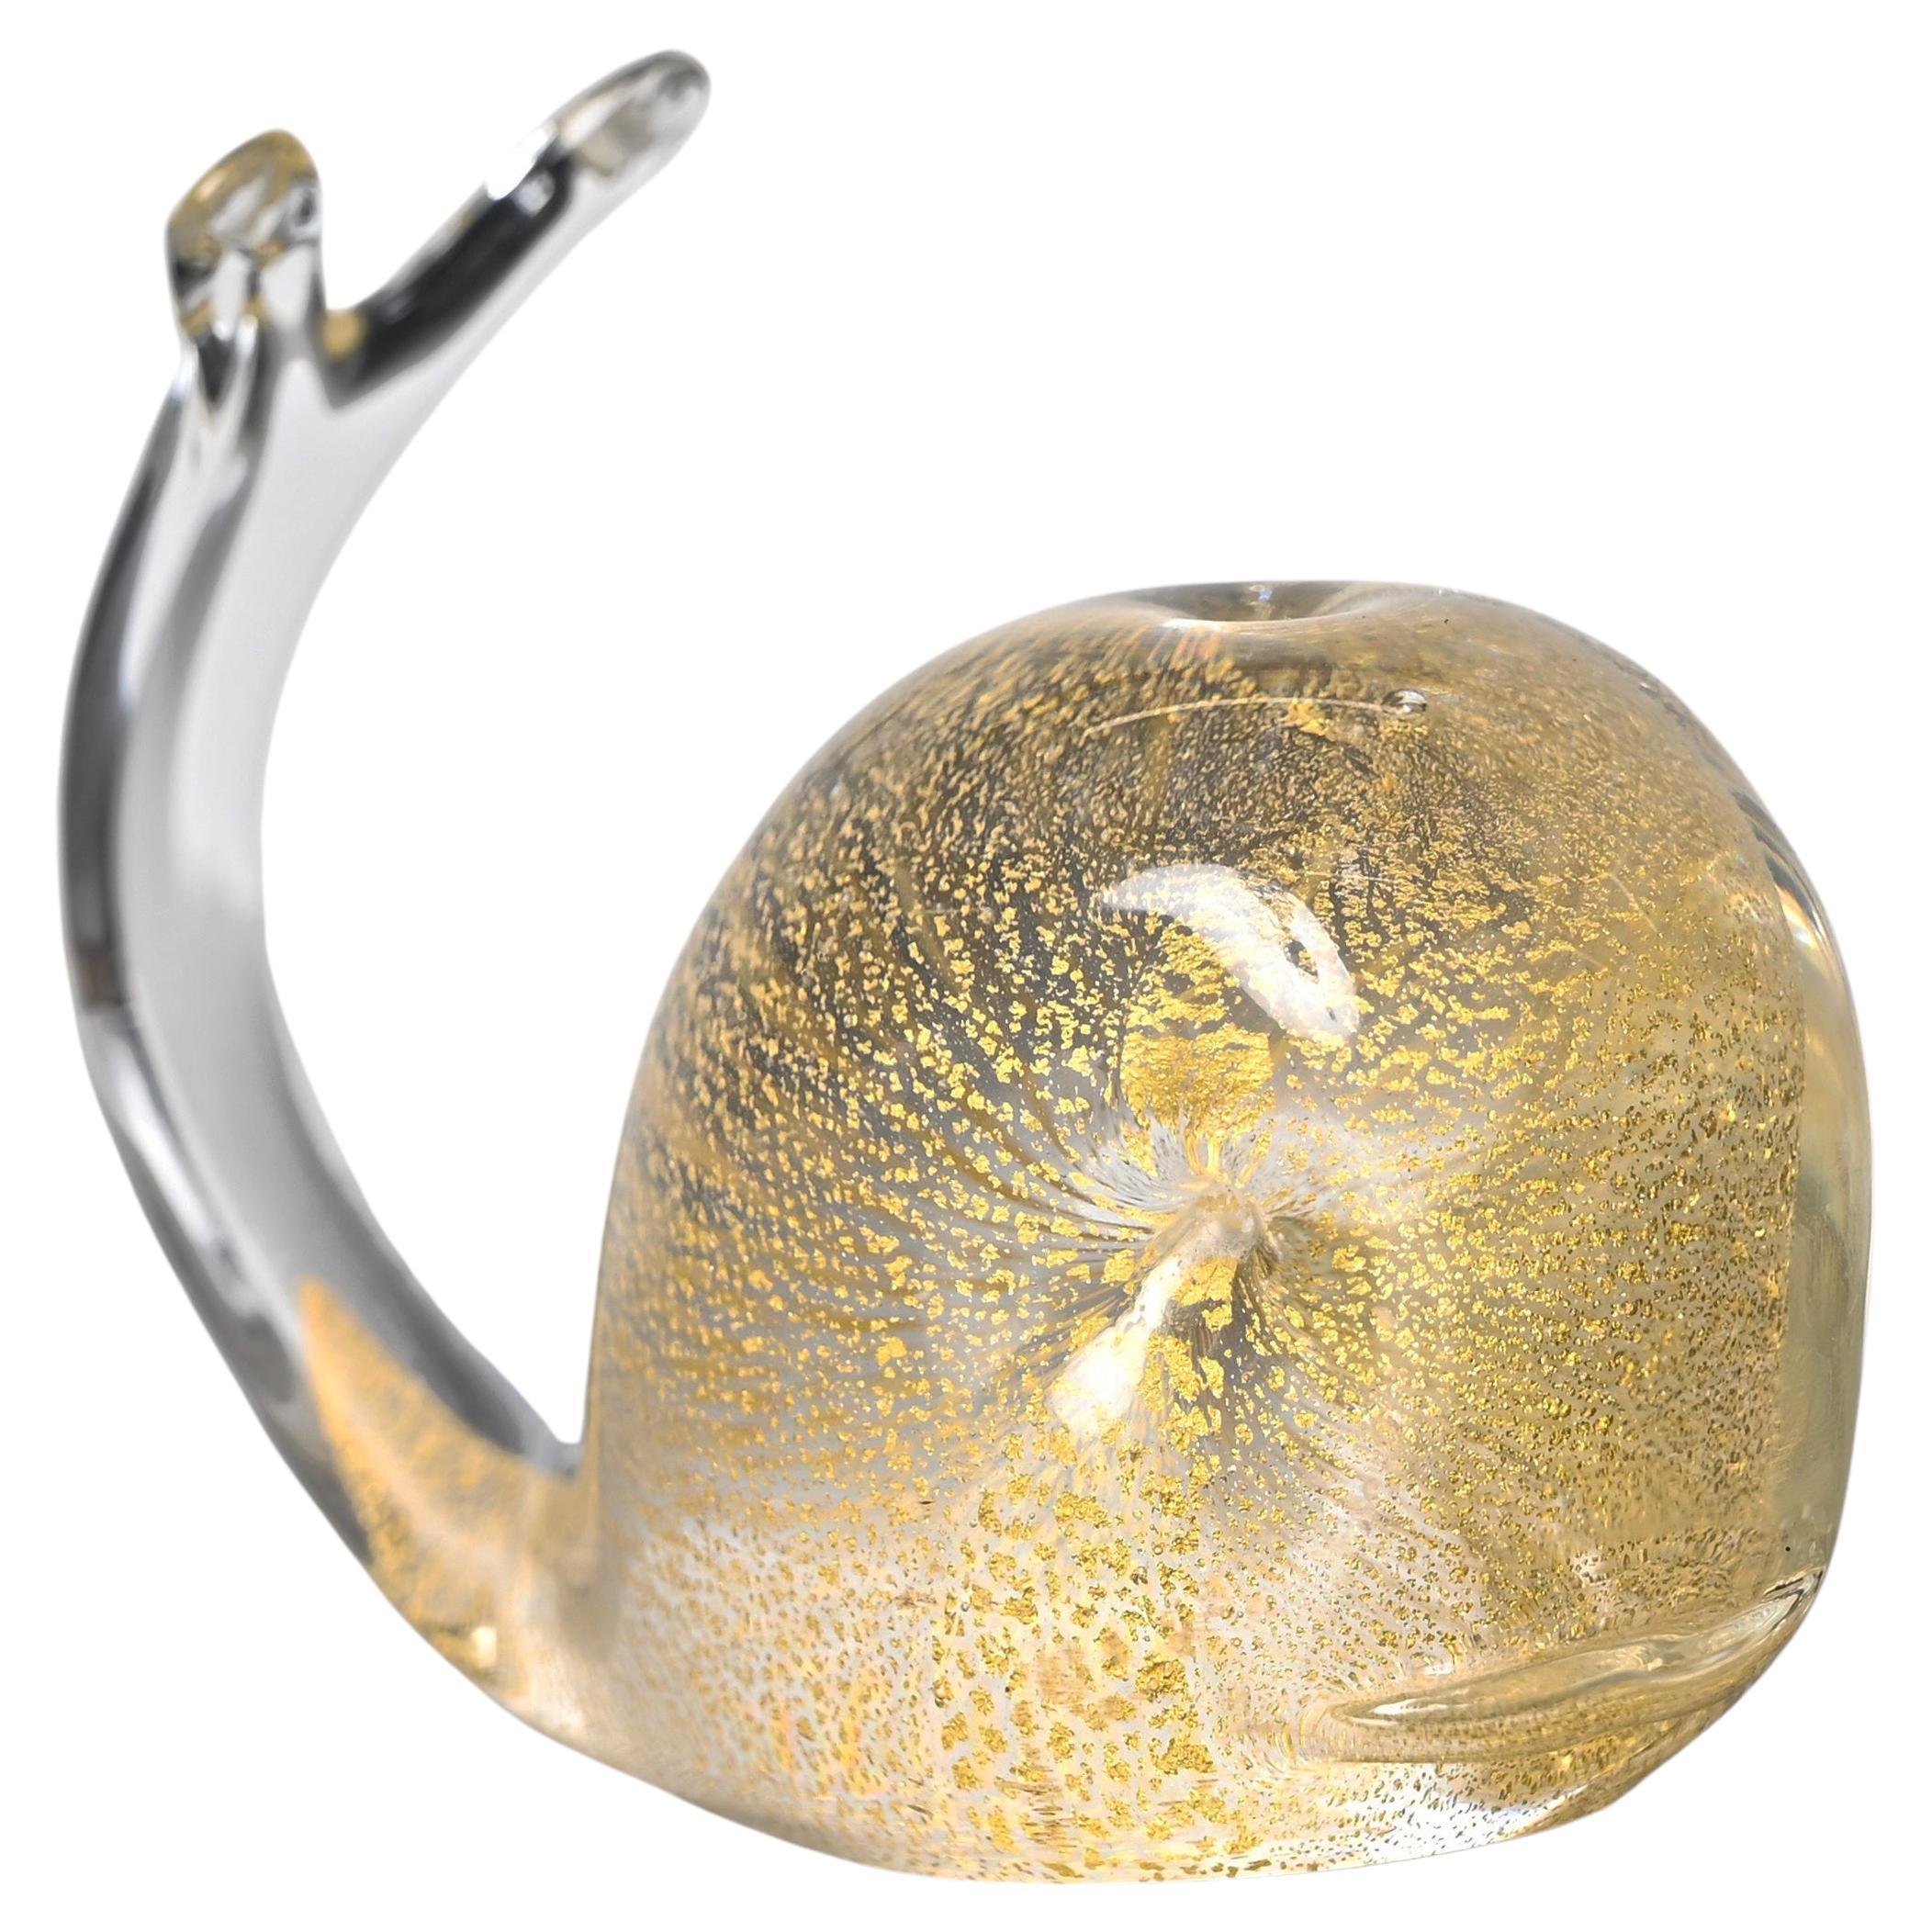 A. Seguso Whale Sculpture in Murano Glass with Gold Dust, Italy 1960s